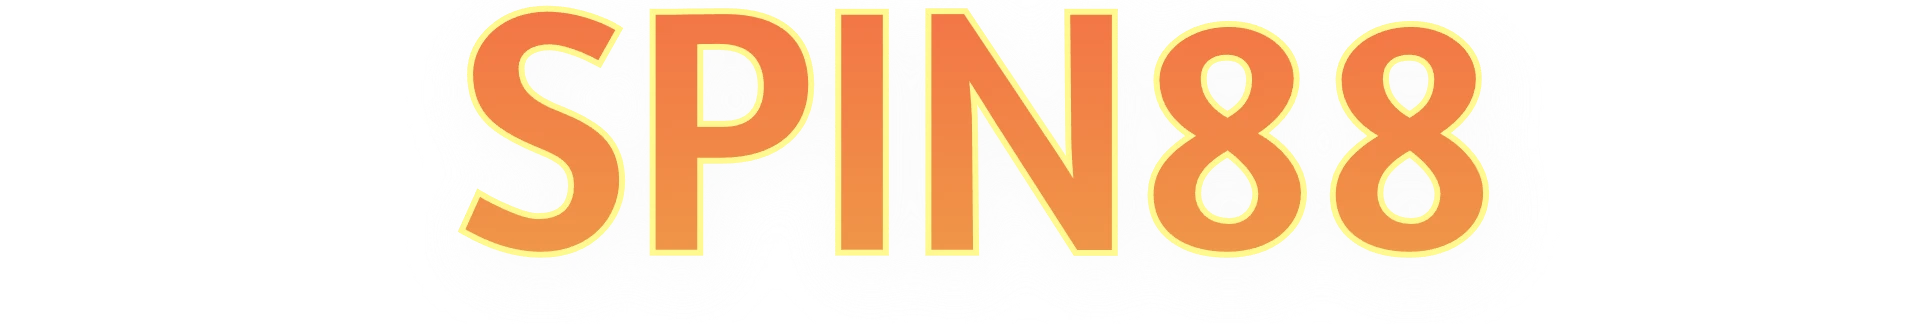 SPIN88